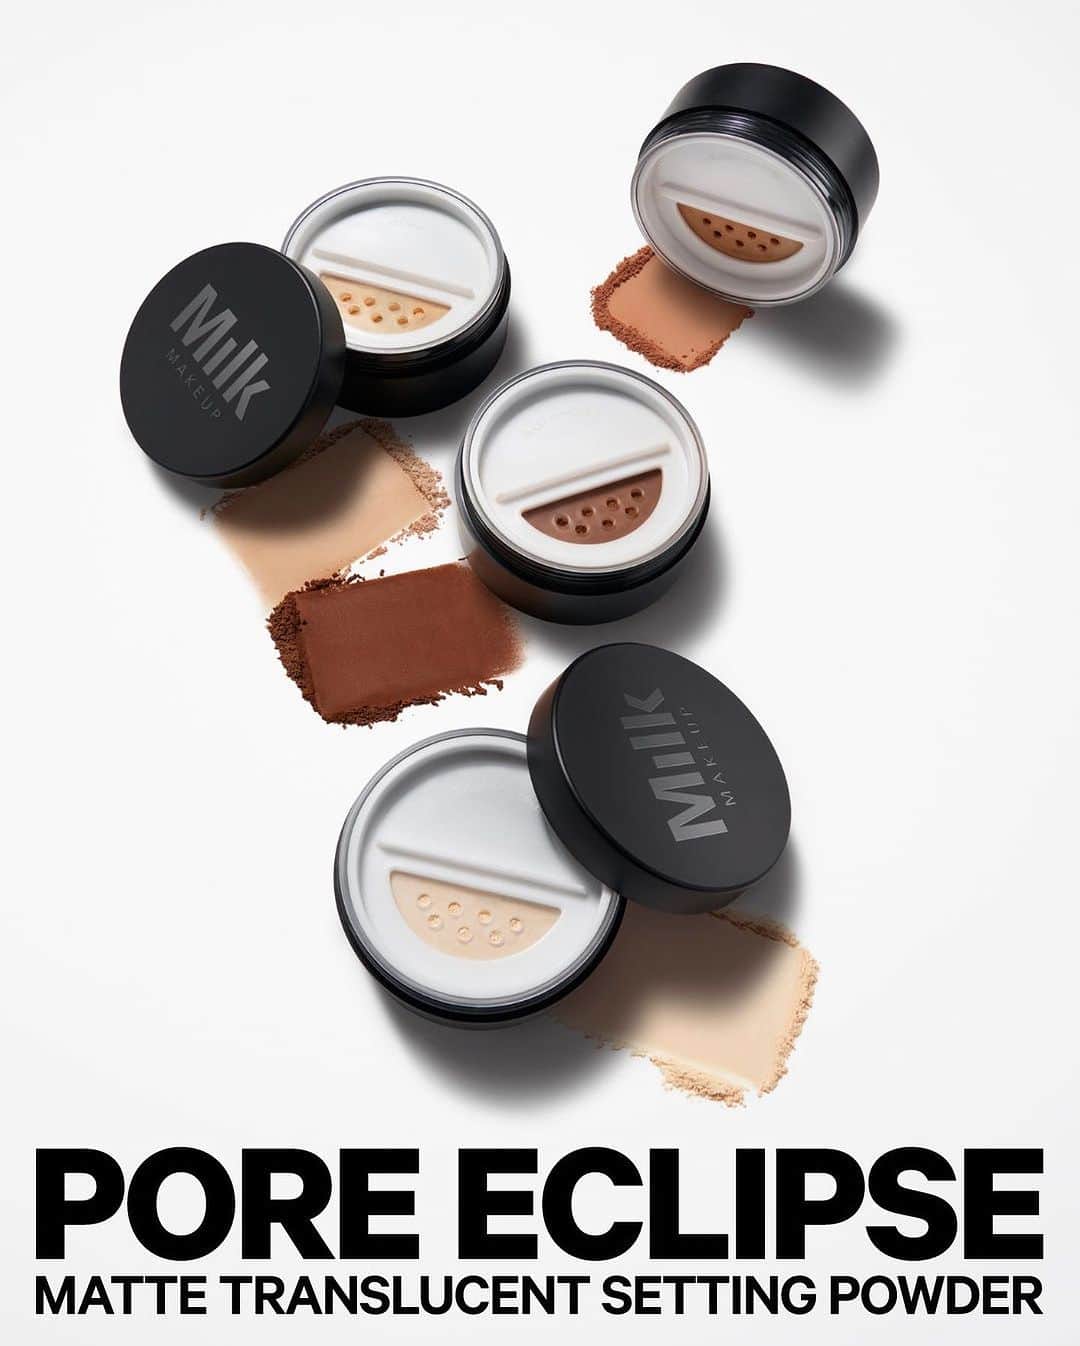 Milk Makeupのインスタグラム：「Makeup locking. Shine blocking. Our NEW! Pore Eclipse Matte Translucent Setting Powder is HERE 🌘 Here’s why it’s the powder you’ve been waiting for 👇  ✨ Blurs pores, controls shine, and sets makeup for up to 16 hours  ✨ Comes in 4 weightless, talc-free translucent shades ✨ Skincare supercharged with niacinamide, bakuchiol, and lentil extract ✨ Mess-free sifter twists open and locks closed to prevent spills ✨ No caking. No creasing. No flashback.  Get it online NOW at milkmakeup.com and sephora.com and in @sephora stores starting 9.7 🛒」